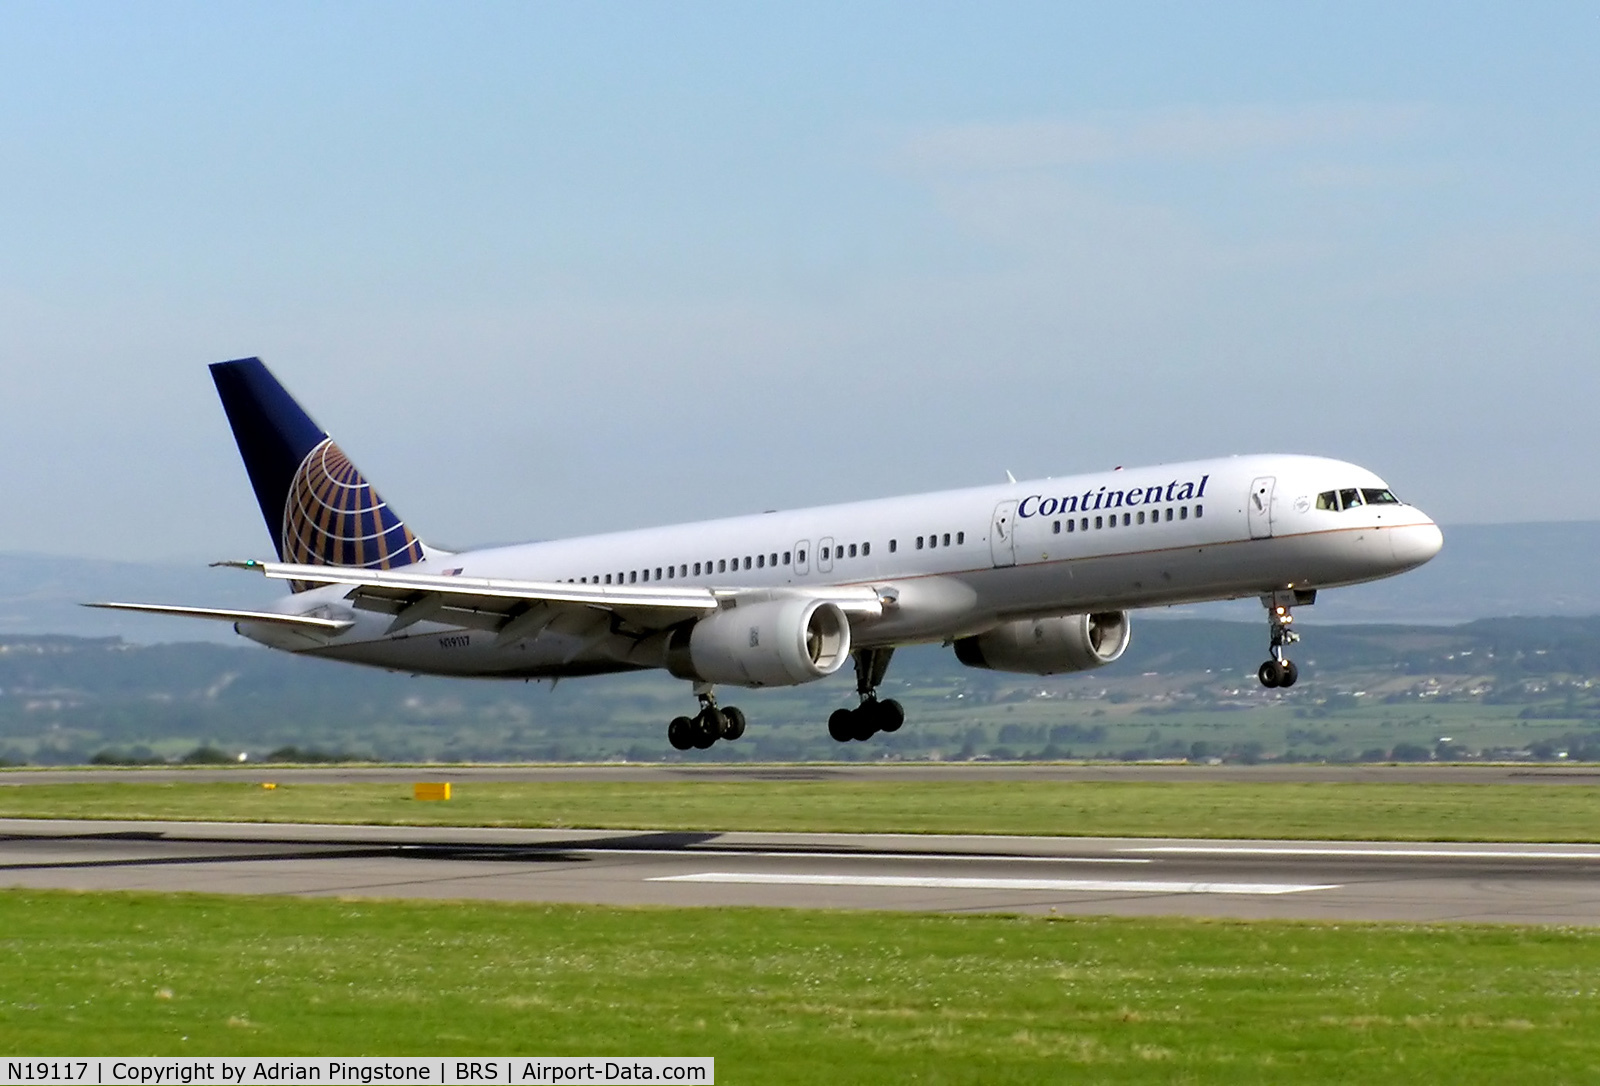 N19117, 1996 Boeing 757-224 C/N 27559, Continental Airlines Boeing 757-200 lands from New York at Bristol International Airport, Bristol, England in August 2005